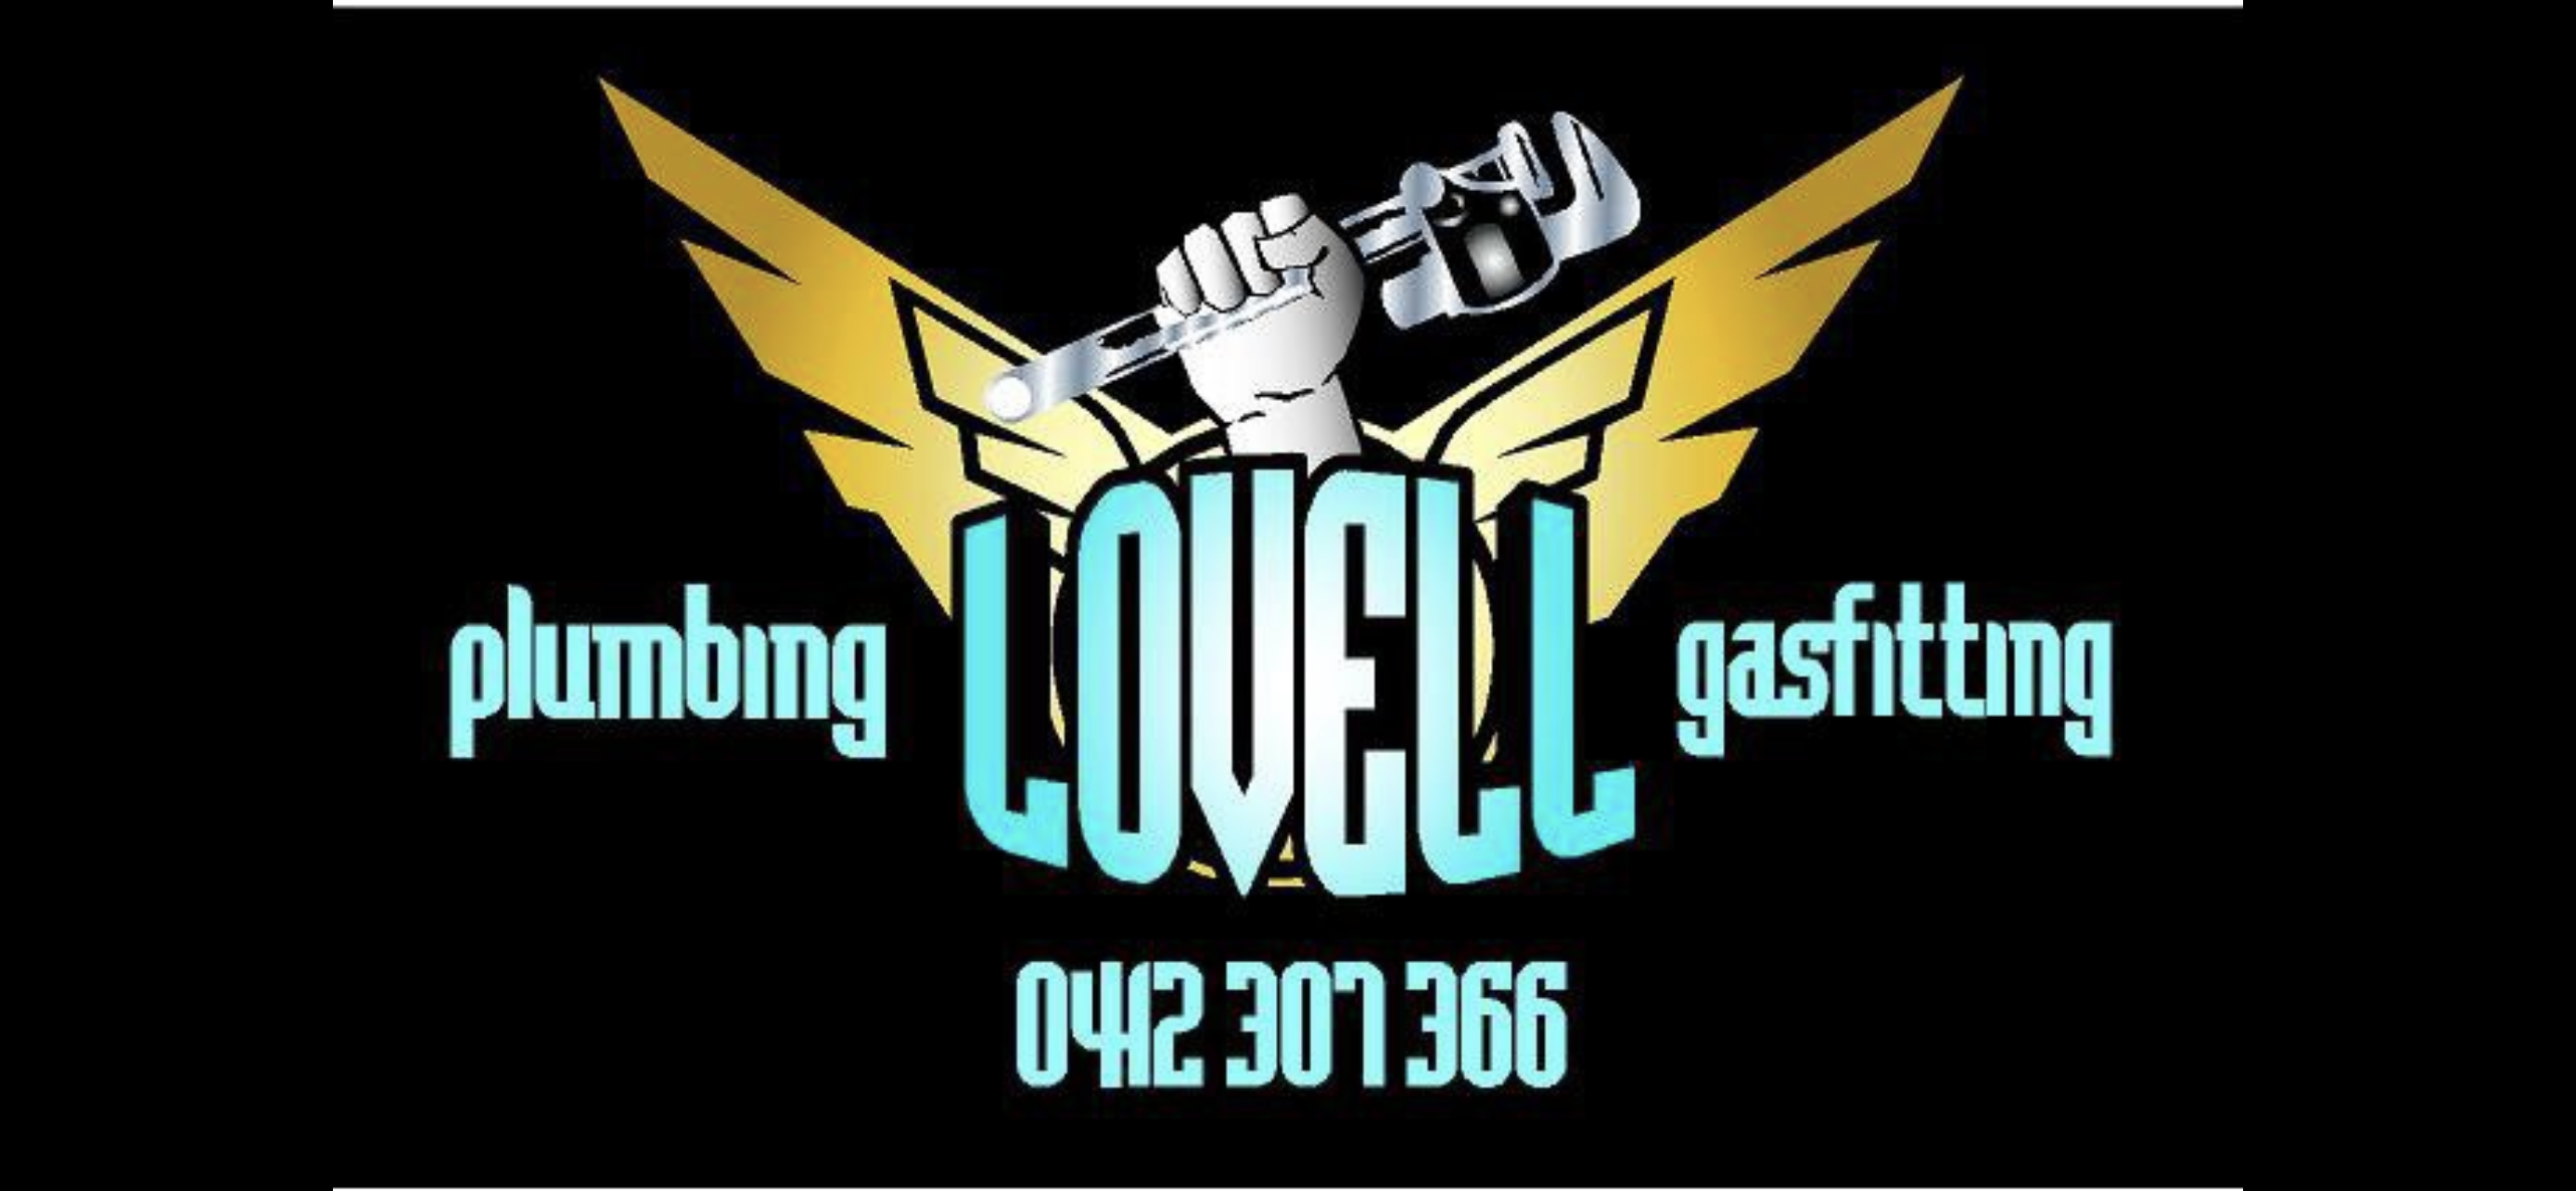 Lovell Plumbing and Gasfitting